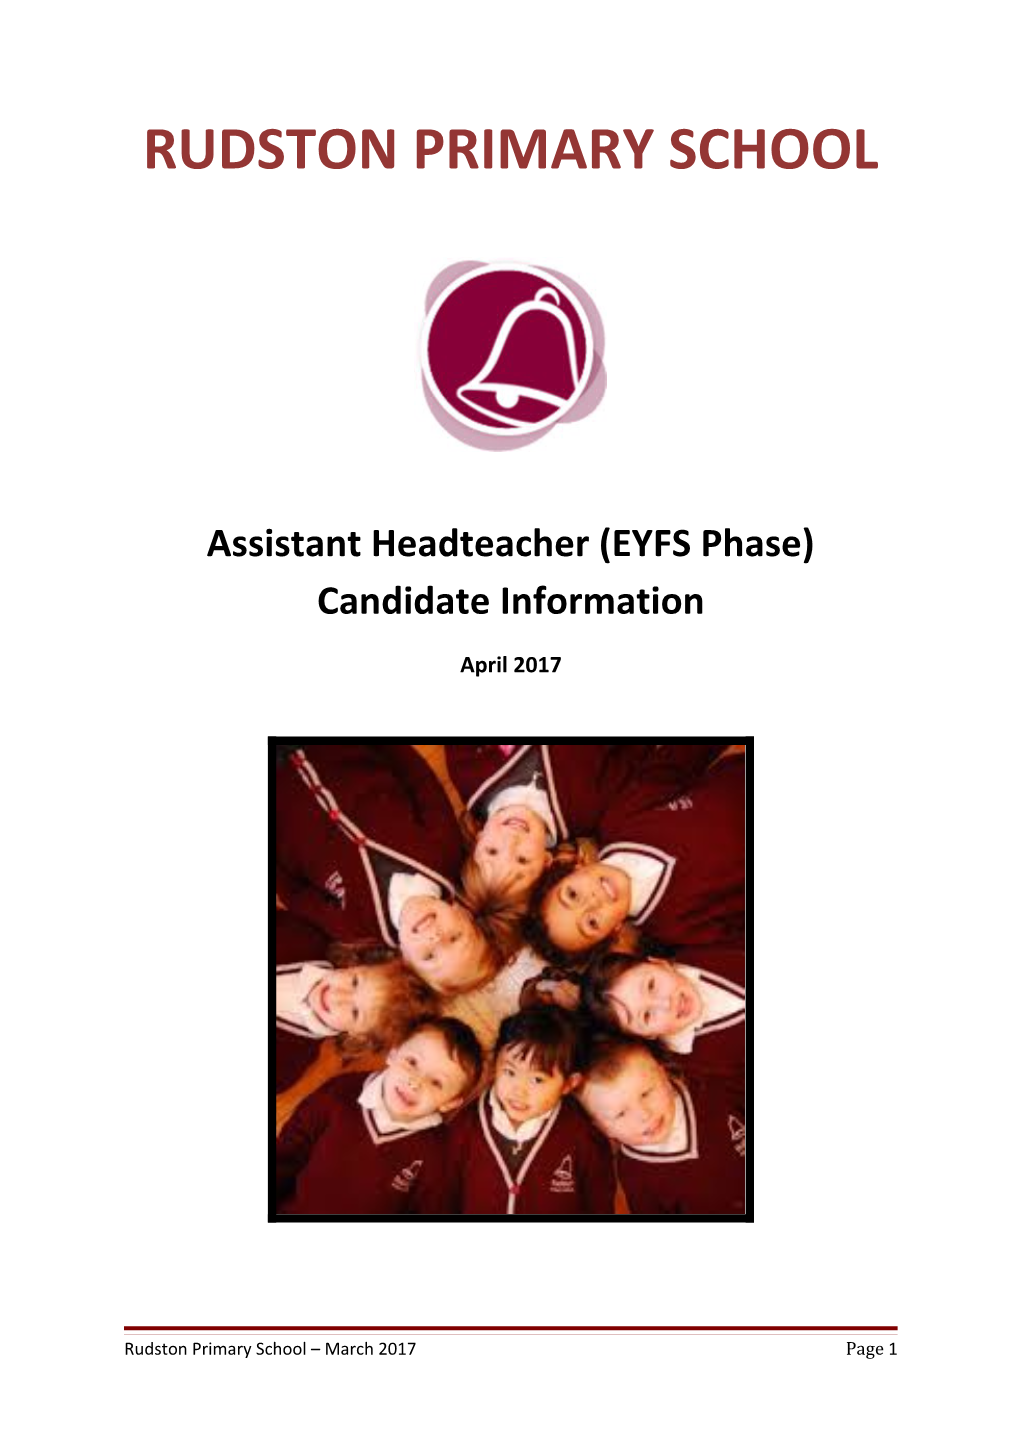 Assistant Headteacher (EYFS Phase) Candidate Information